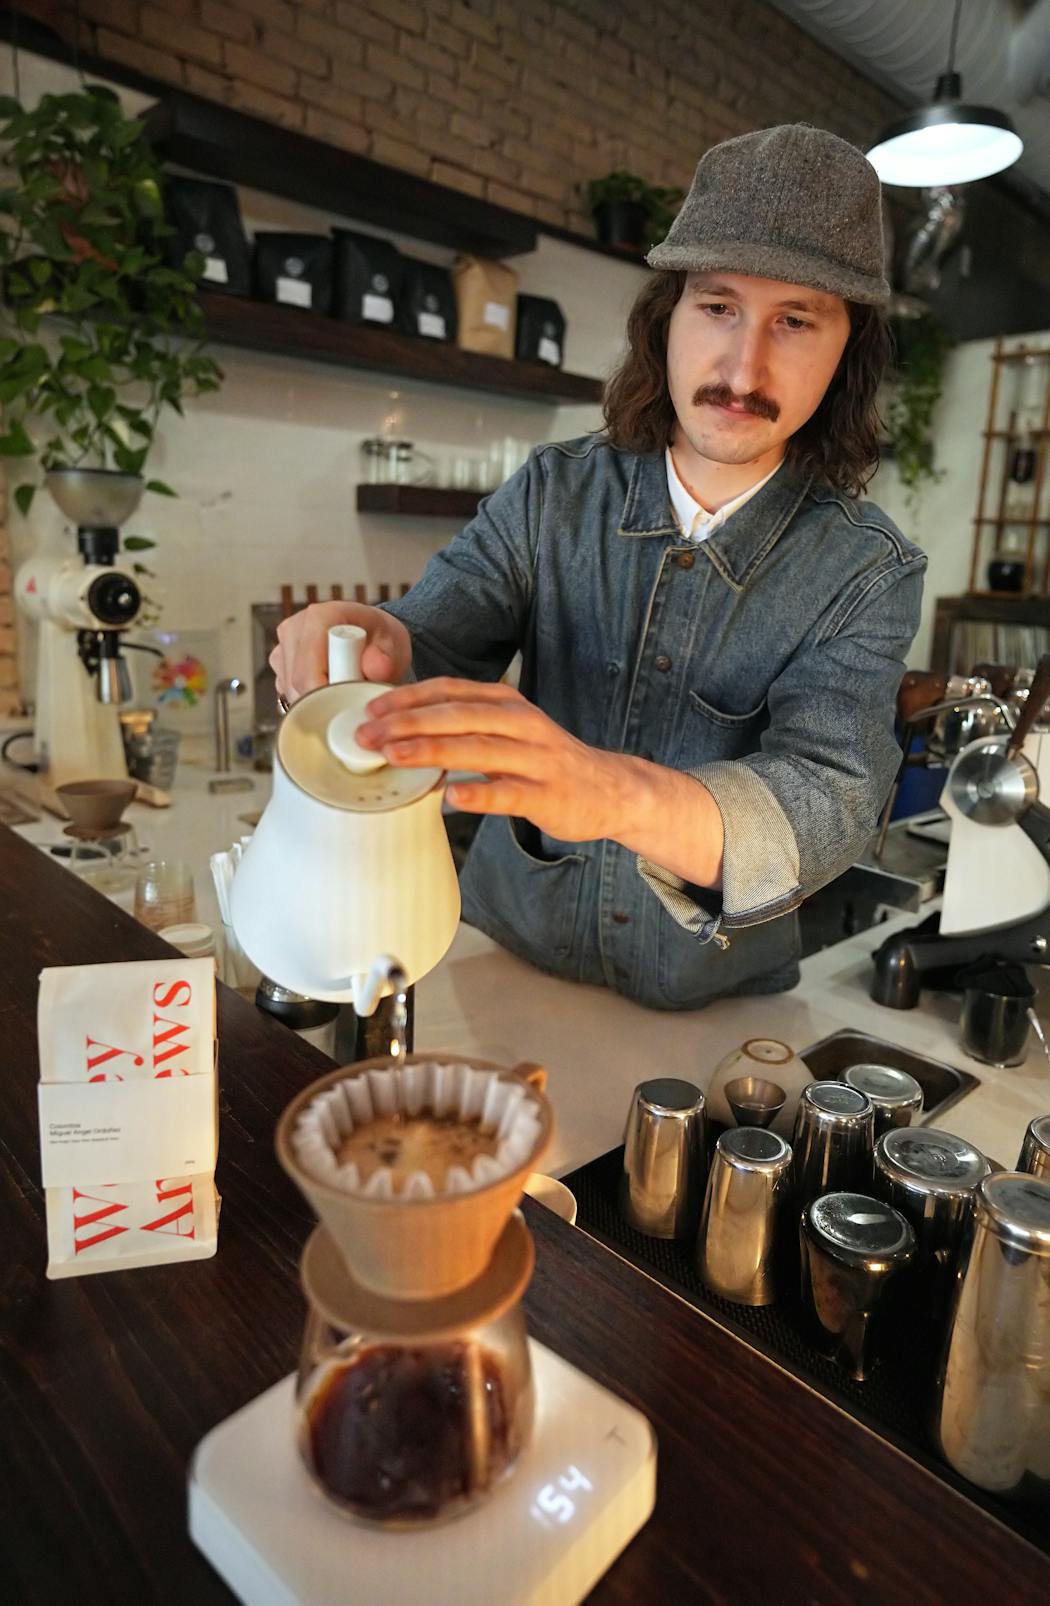 Sam Nargan of Wesley Andrews Coffee says many coffee drinkers are “blown away” by the limited edition offerings.